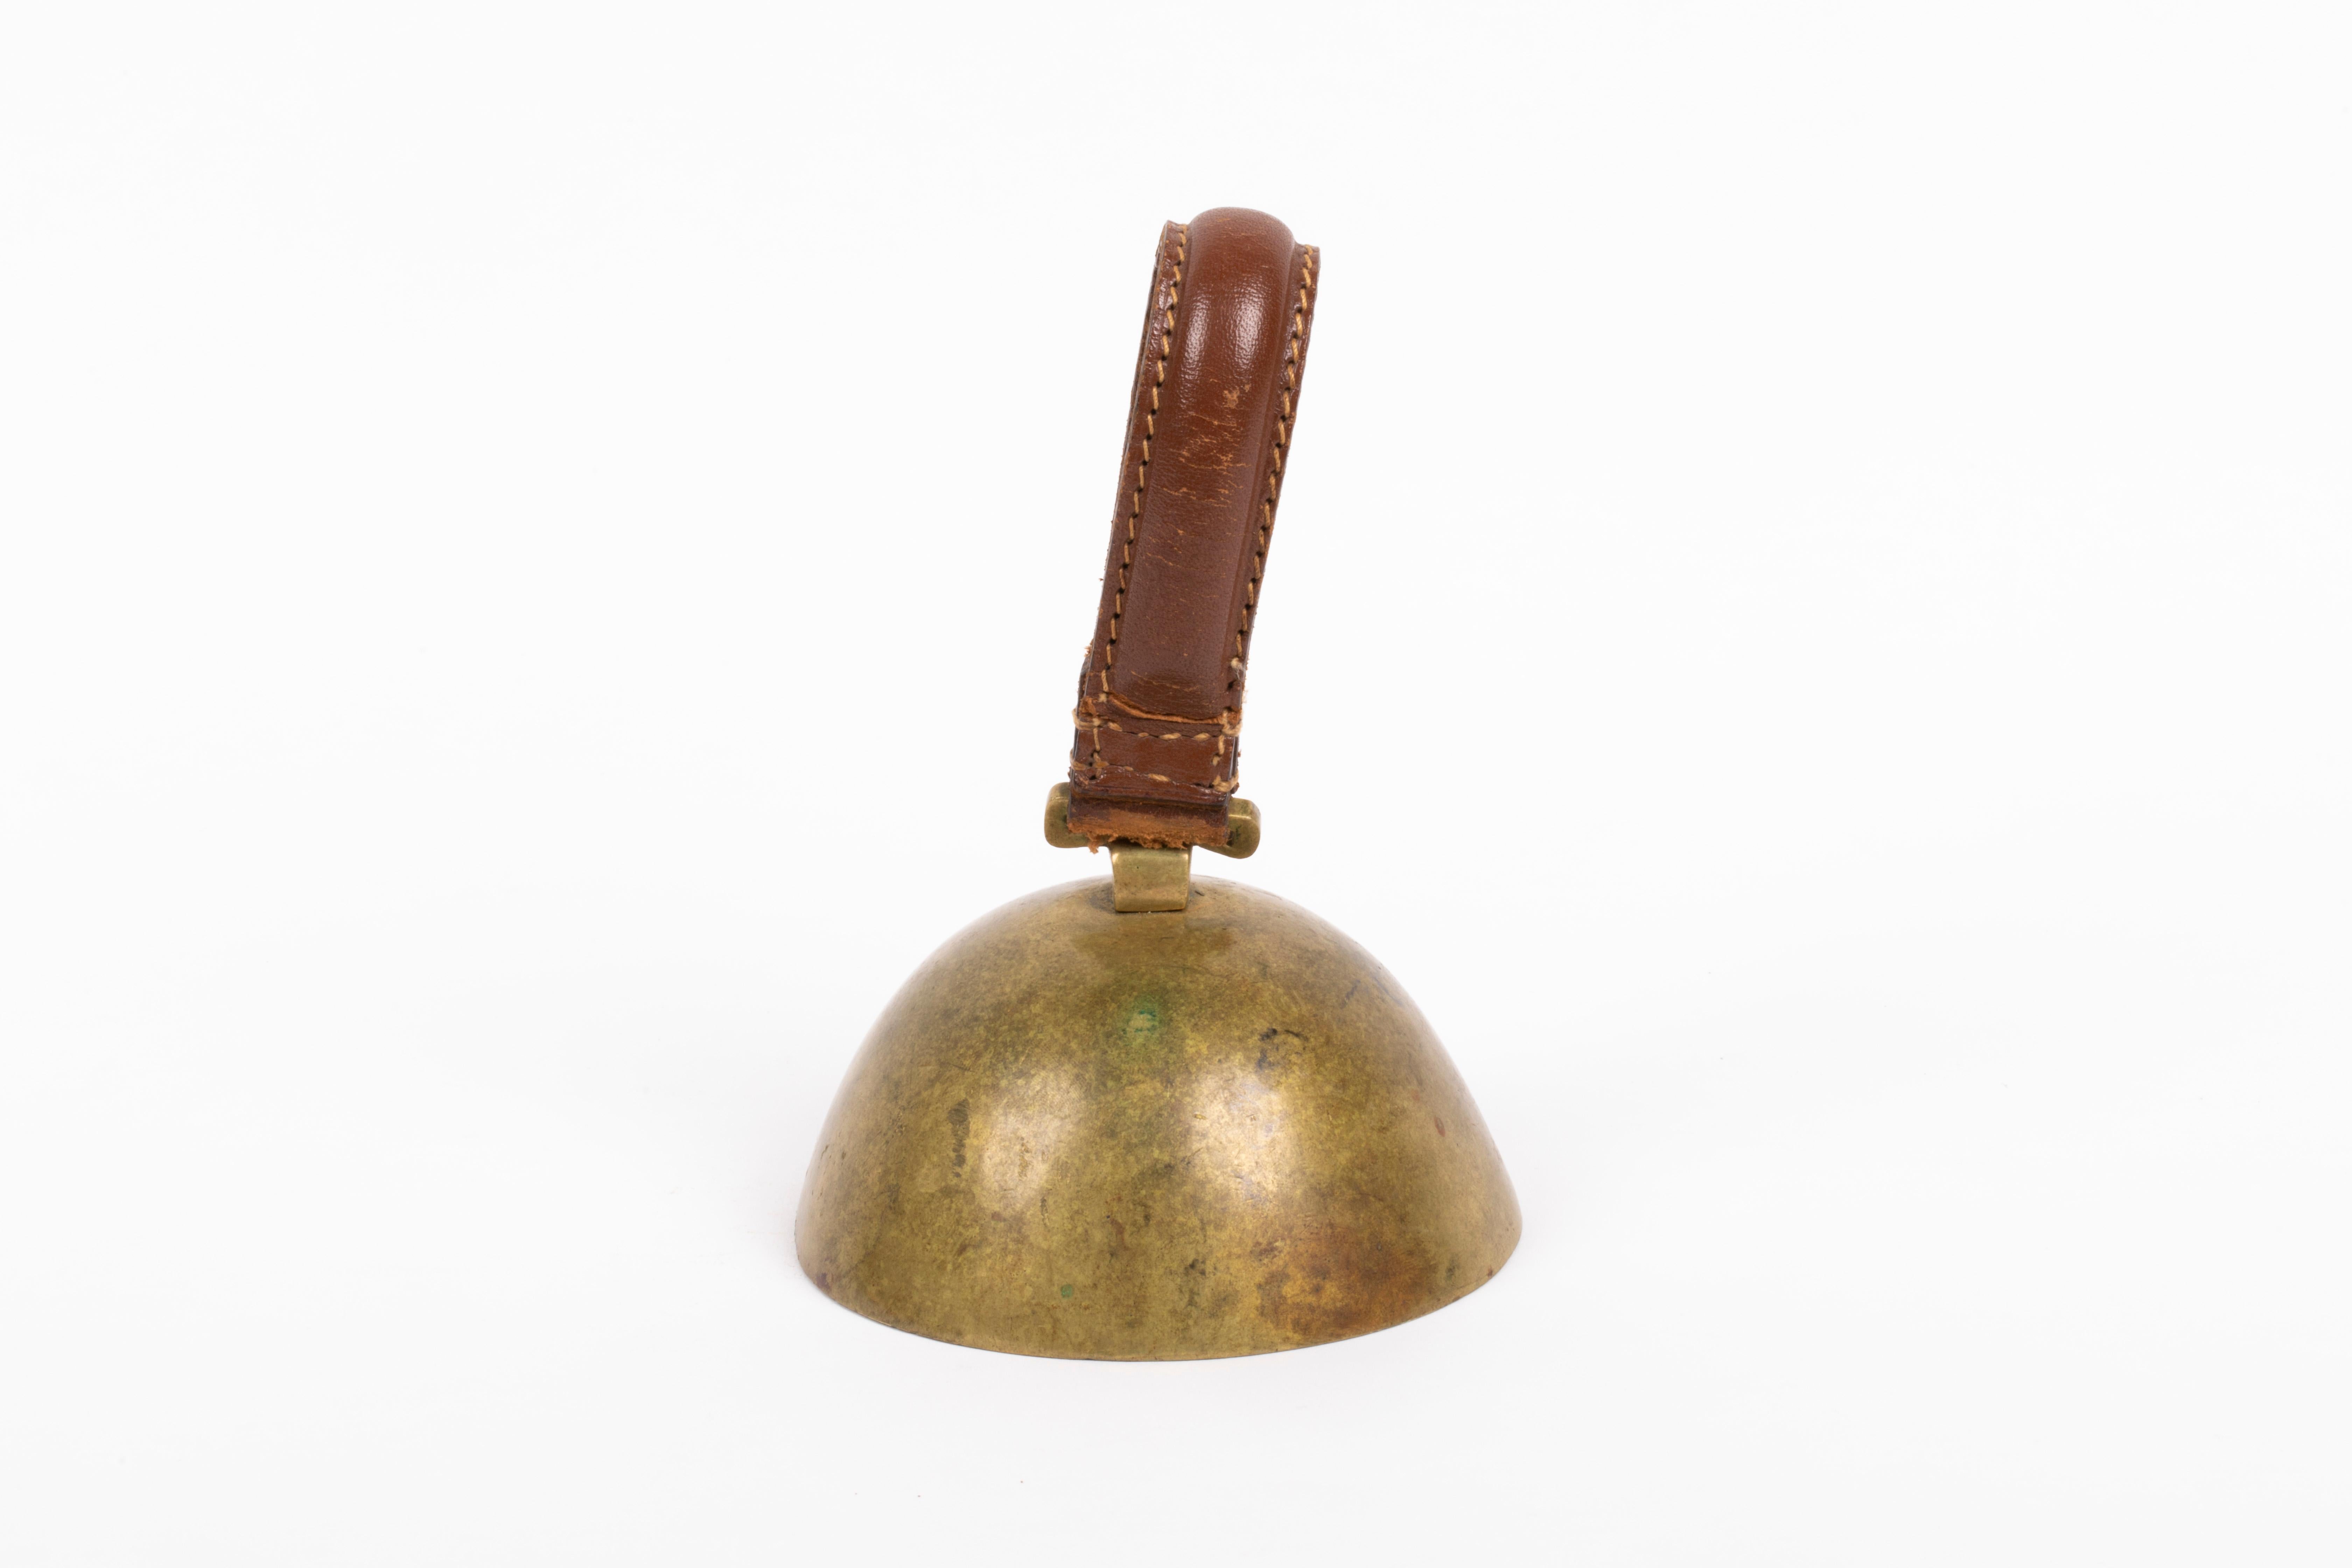 Carl Auböck bell, Austria 1960s. The bell without the handle measures 5cm in height.